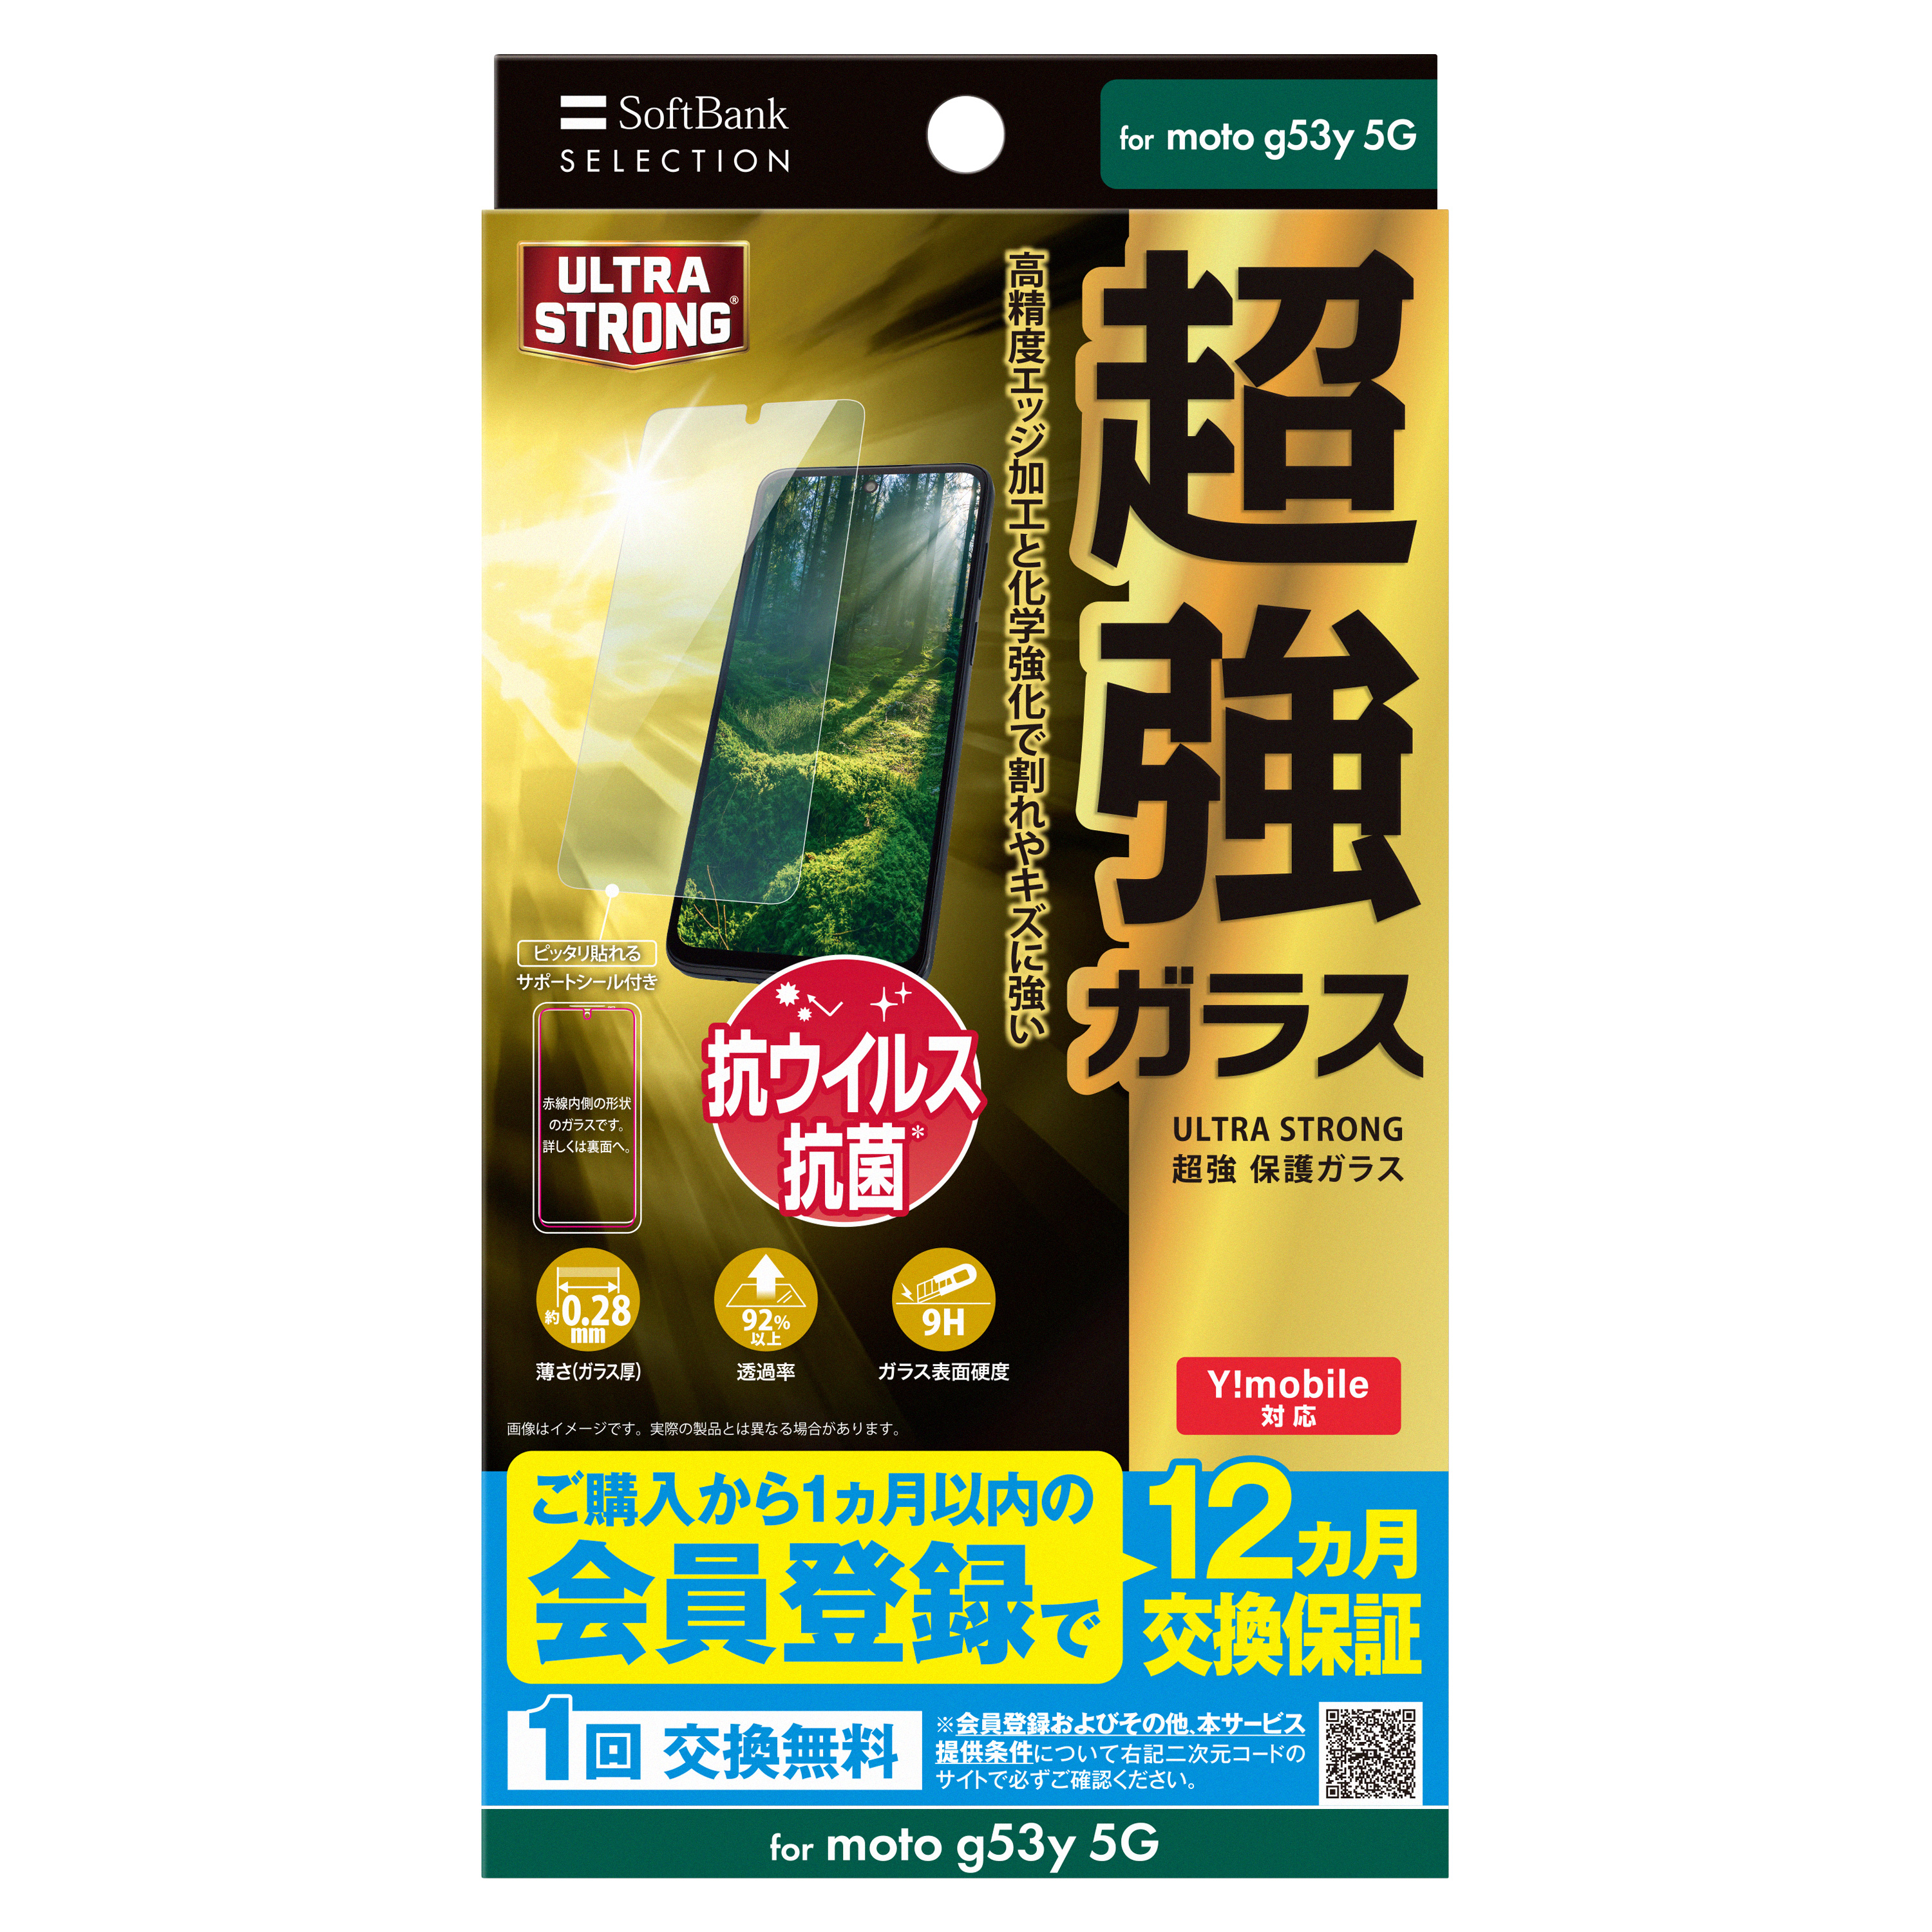 SoftBank SELECTION ULTRA STRONG 超強 保護ガラス for moto g53y 5G